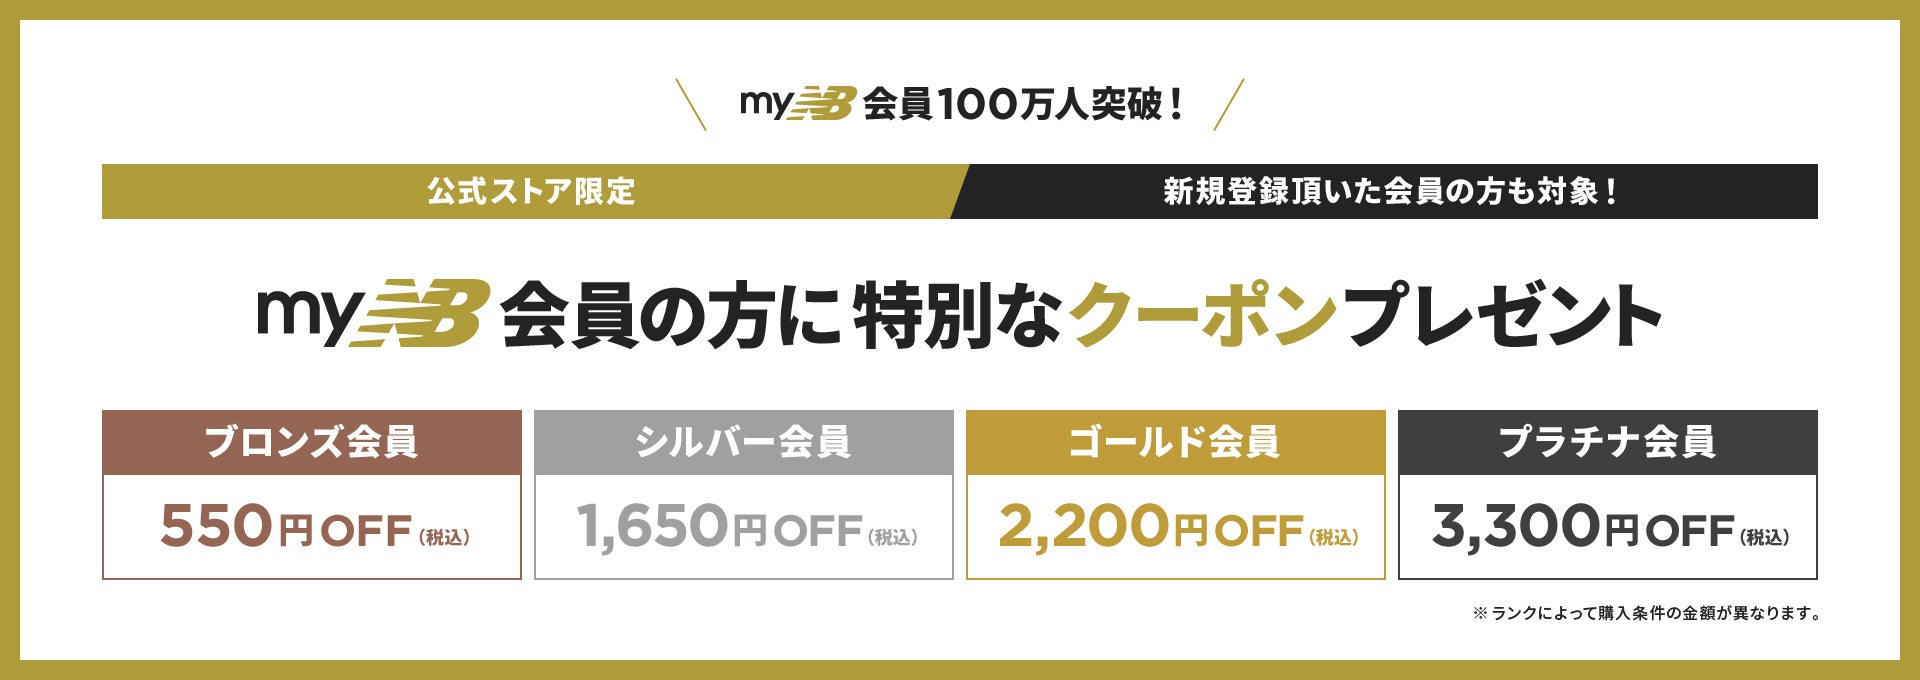 myNB会員の方に特別なクーポンプレゼント. 公式ストア限定. 新規登録頂いた会員の方も対象!